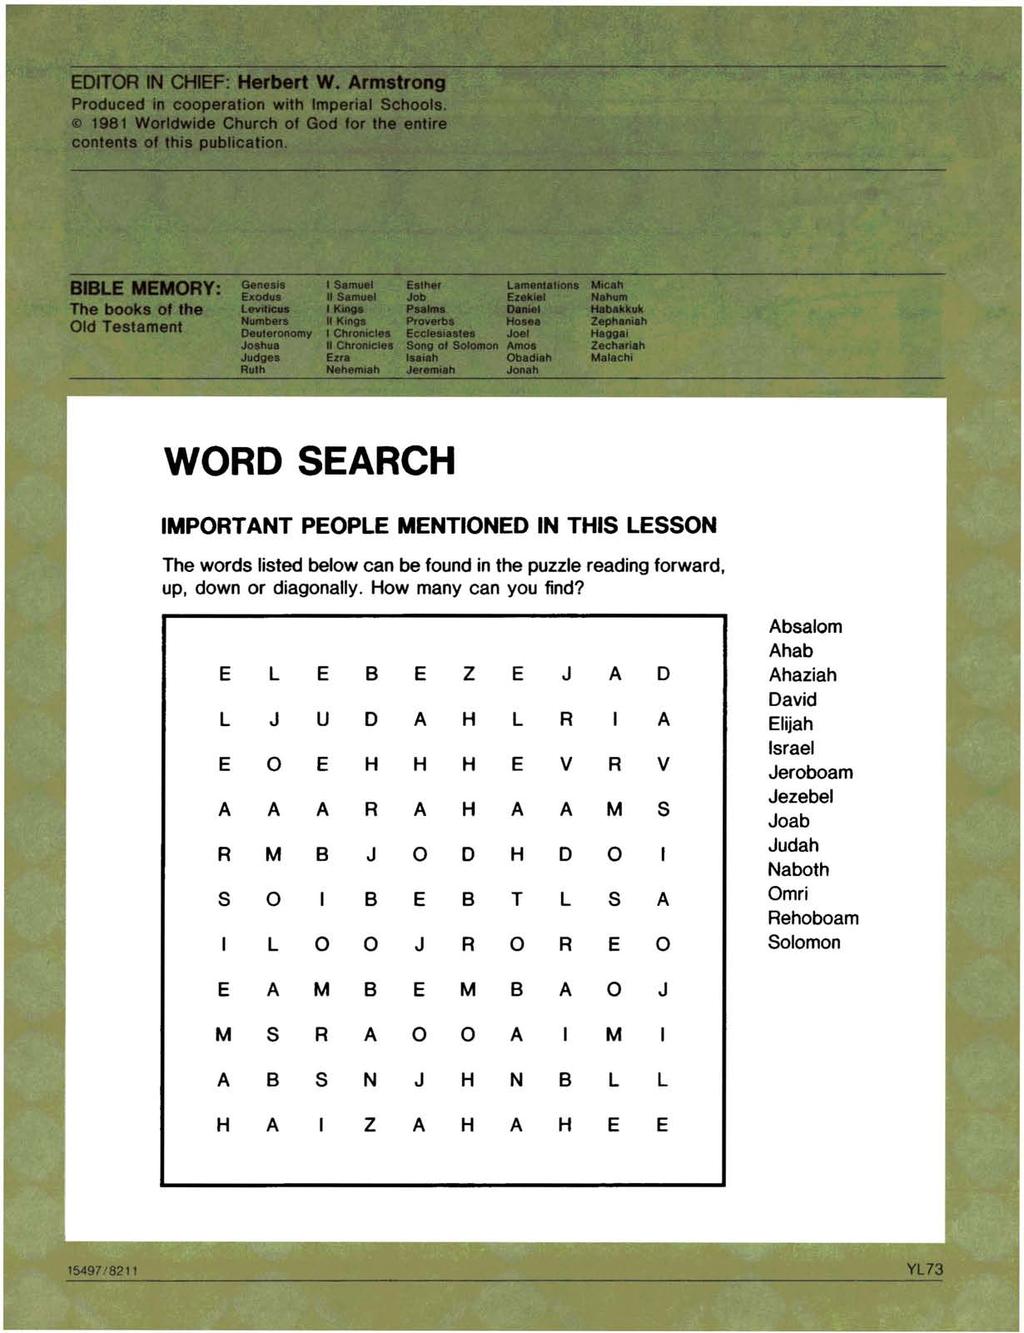 WORD SEARCH IMPORTANT PEOPLE MENTIONED IN THIS LESSON The words listed below can be found in the puzzle reading forward, up, down or diagonally. How many can you find?